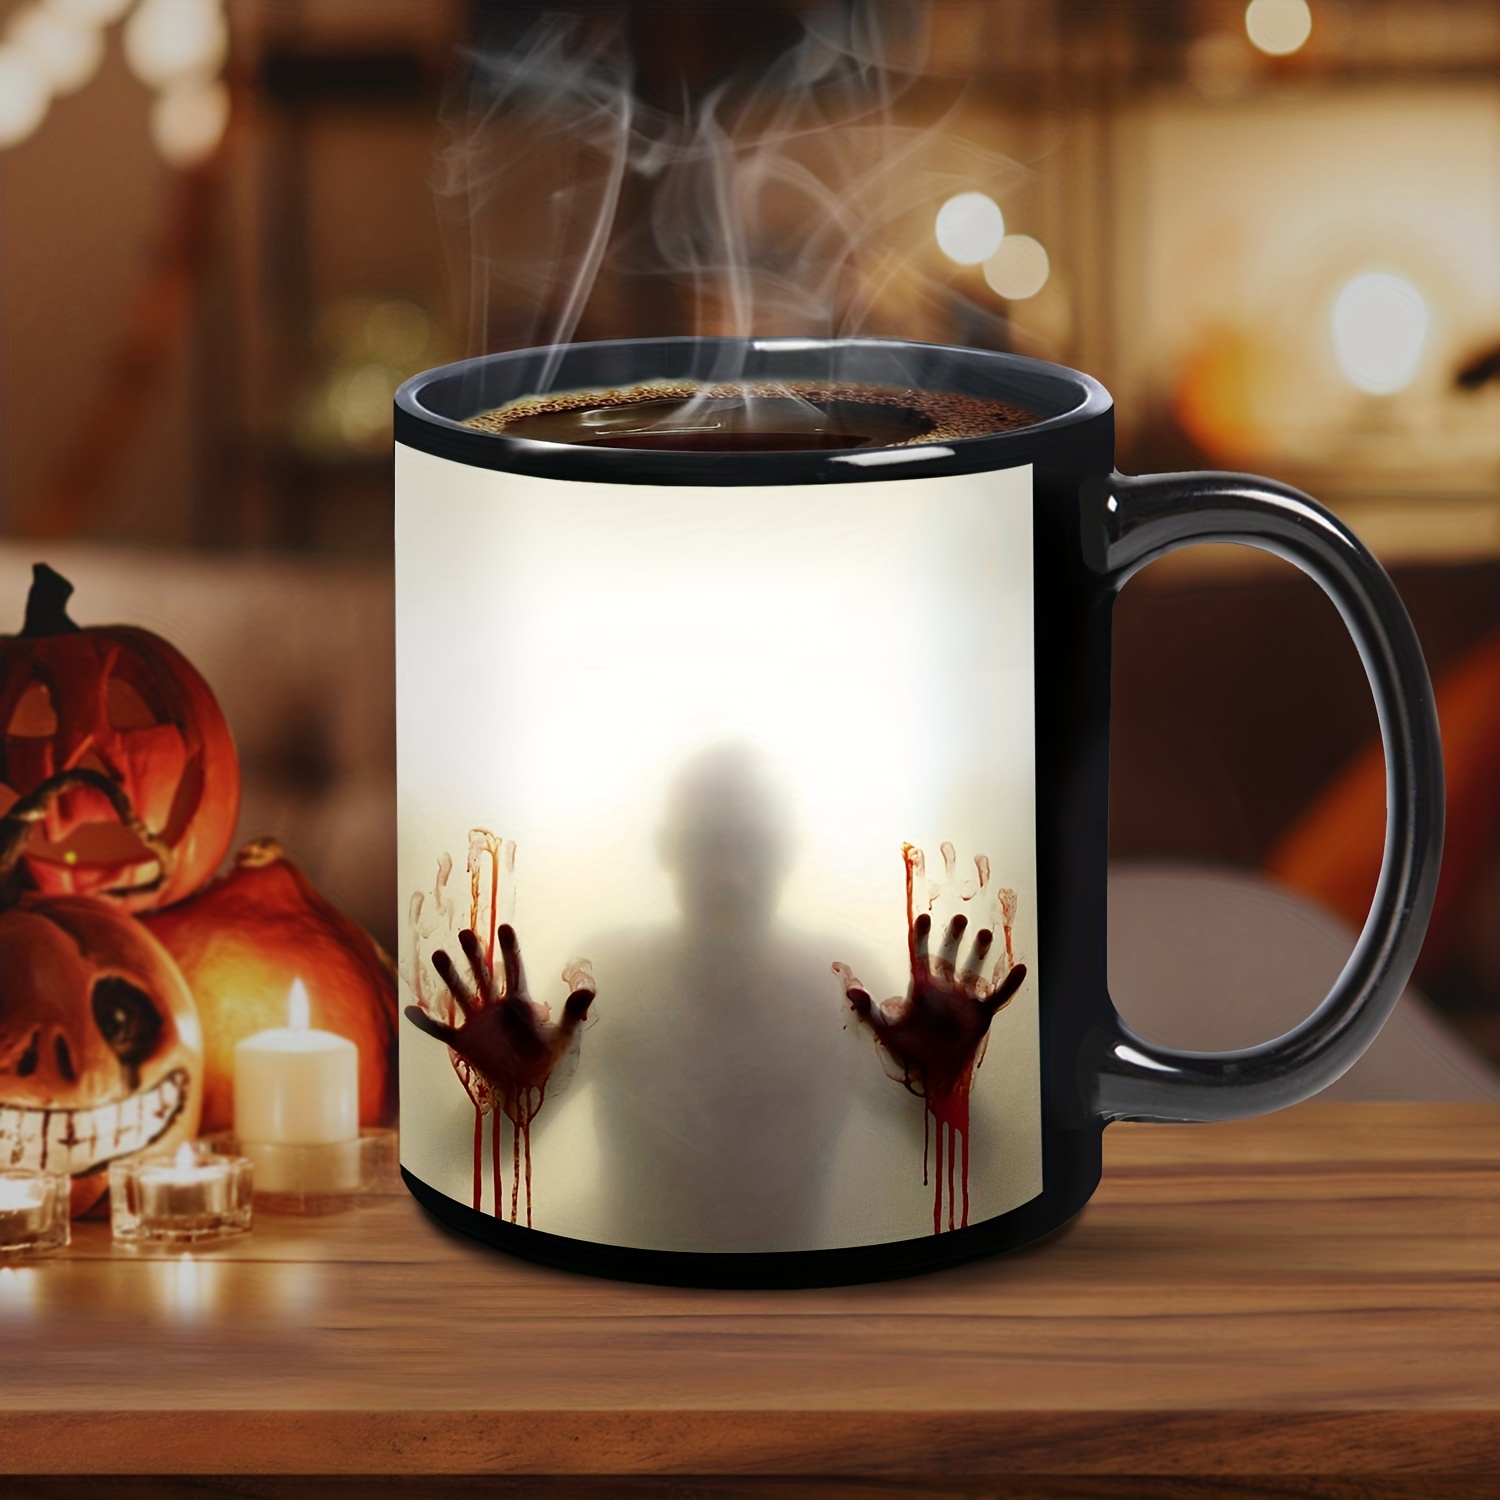 1pc We Are All Mad Here Halloween Ceramic Coffee Mug 11oz Gift For Men  Women Halloween Christmas Birthday Mother Father Friends